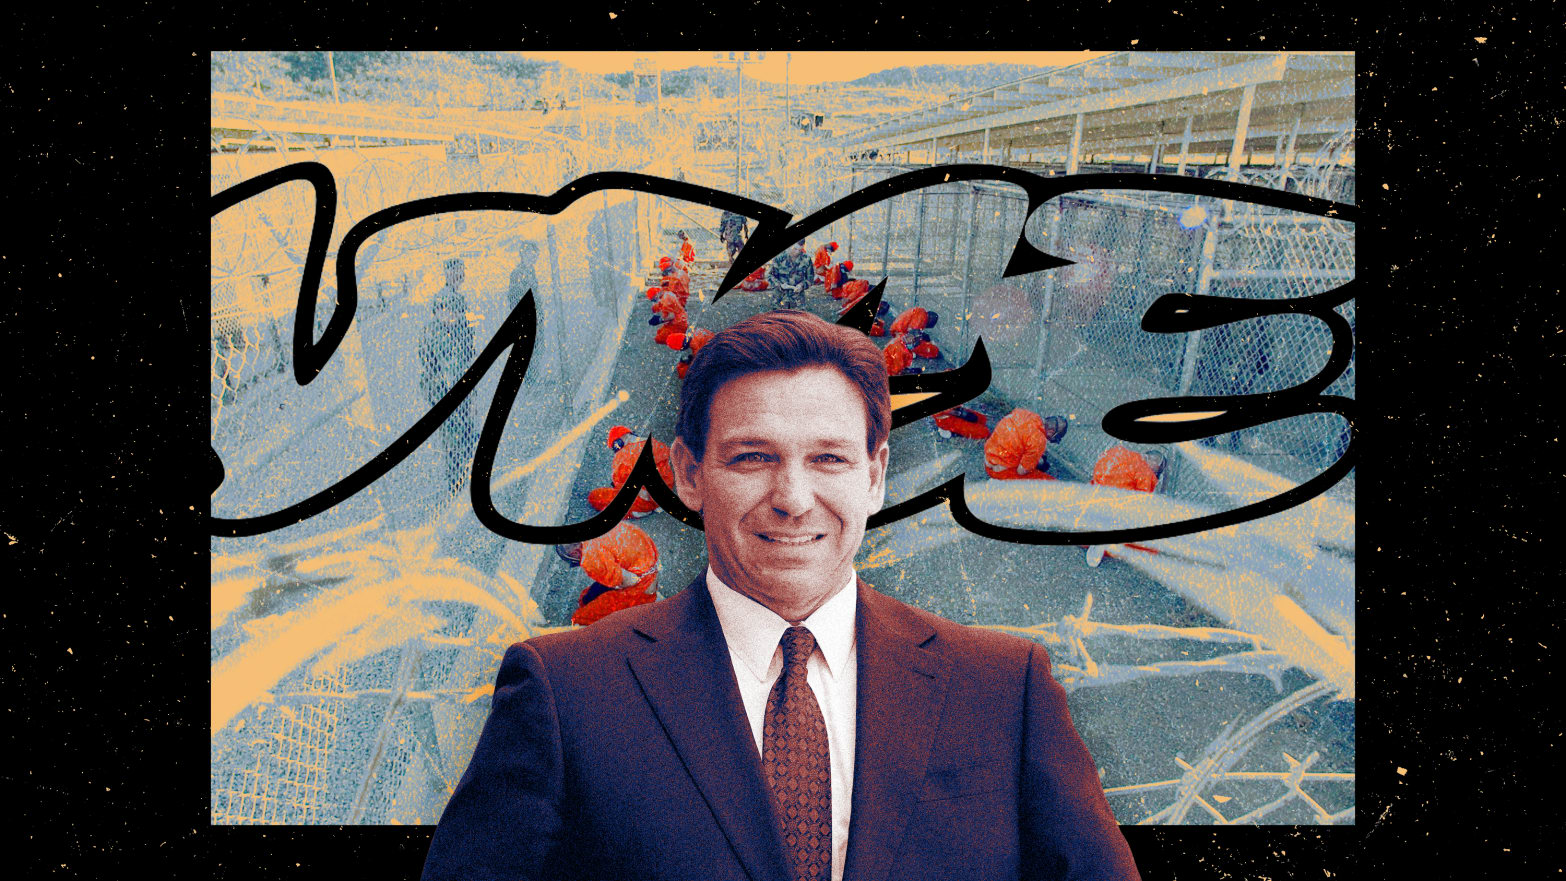 A photo illustration of Florida Governor Ron DeSantis over a background image of Guantanamo Bay prisoners and Vice logo.